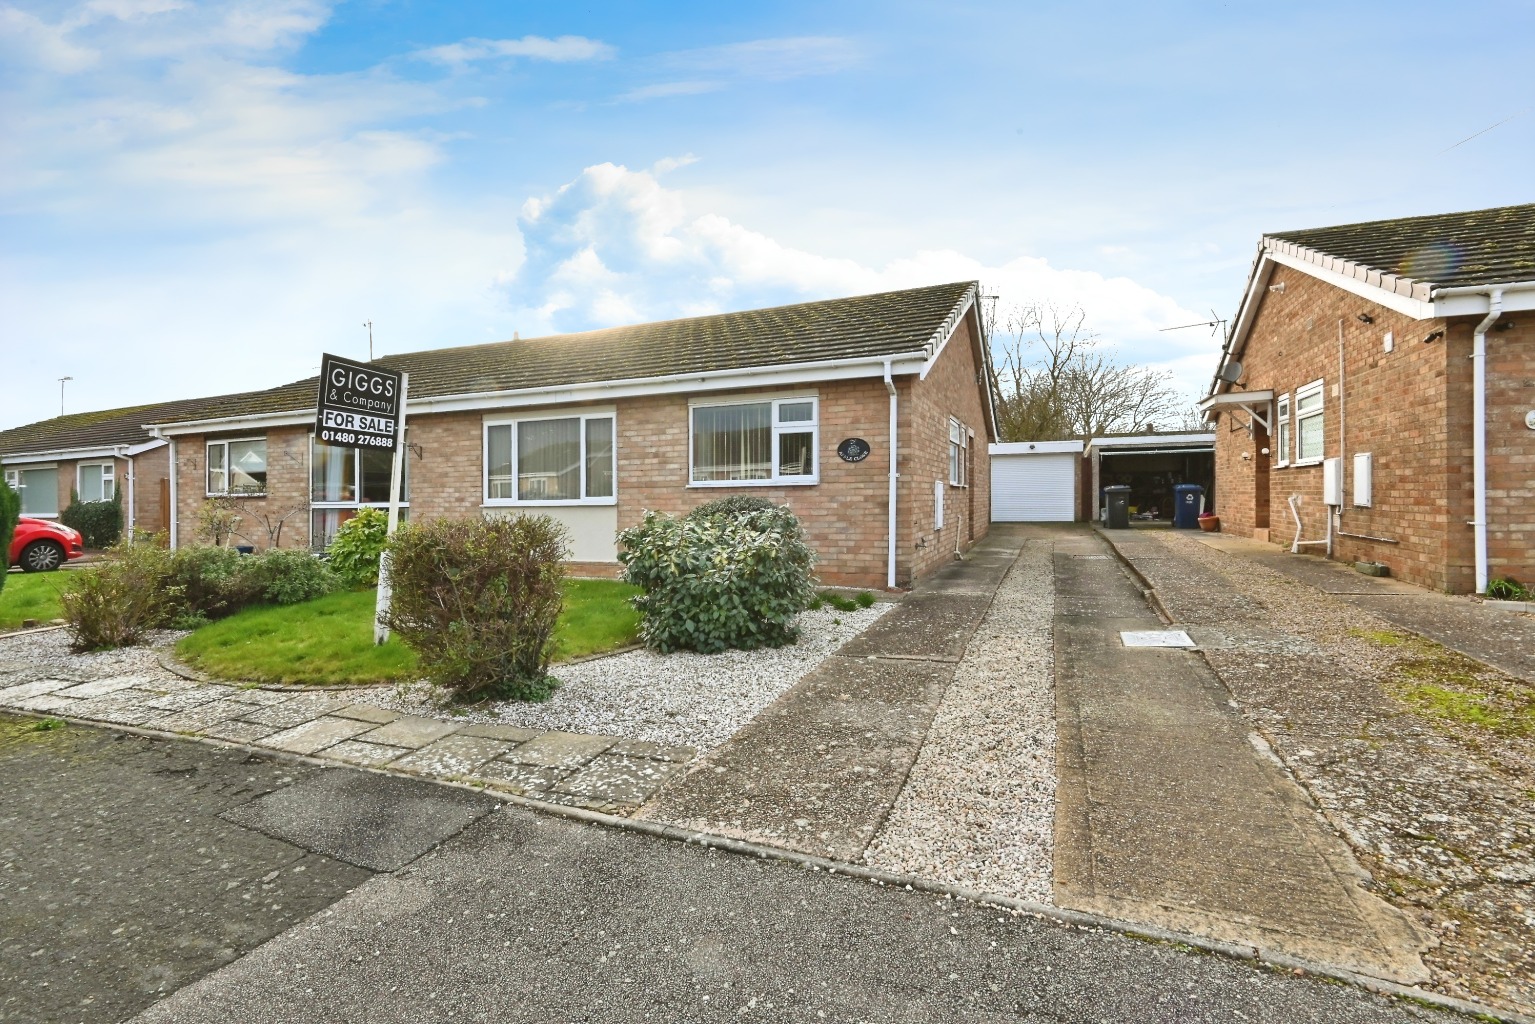 2 bed bungalow for sale in Apple Close, St Neots - Property Image 1